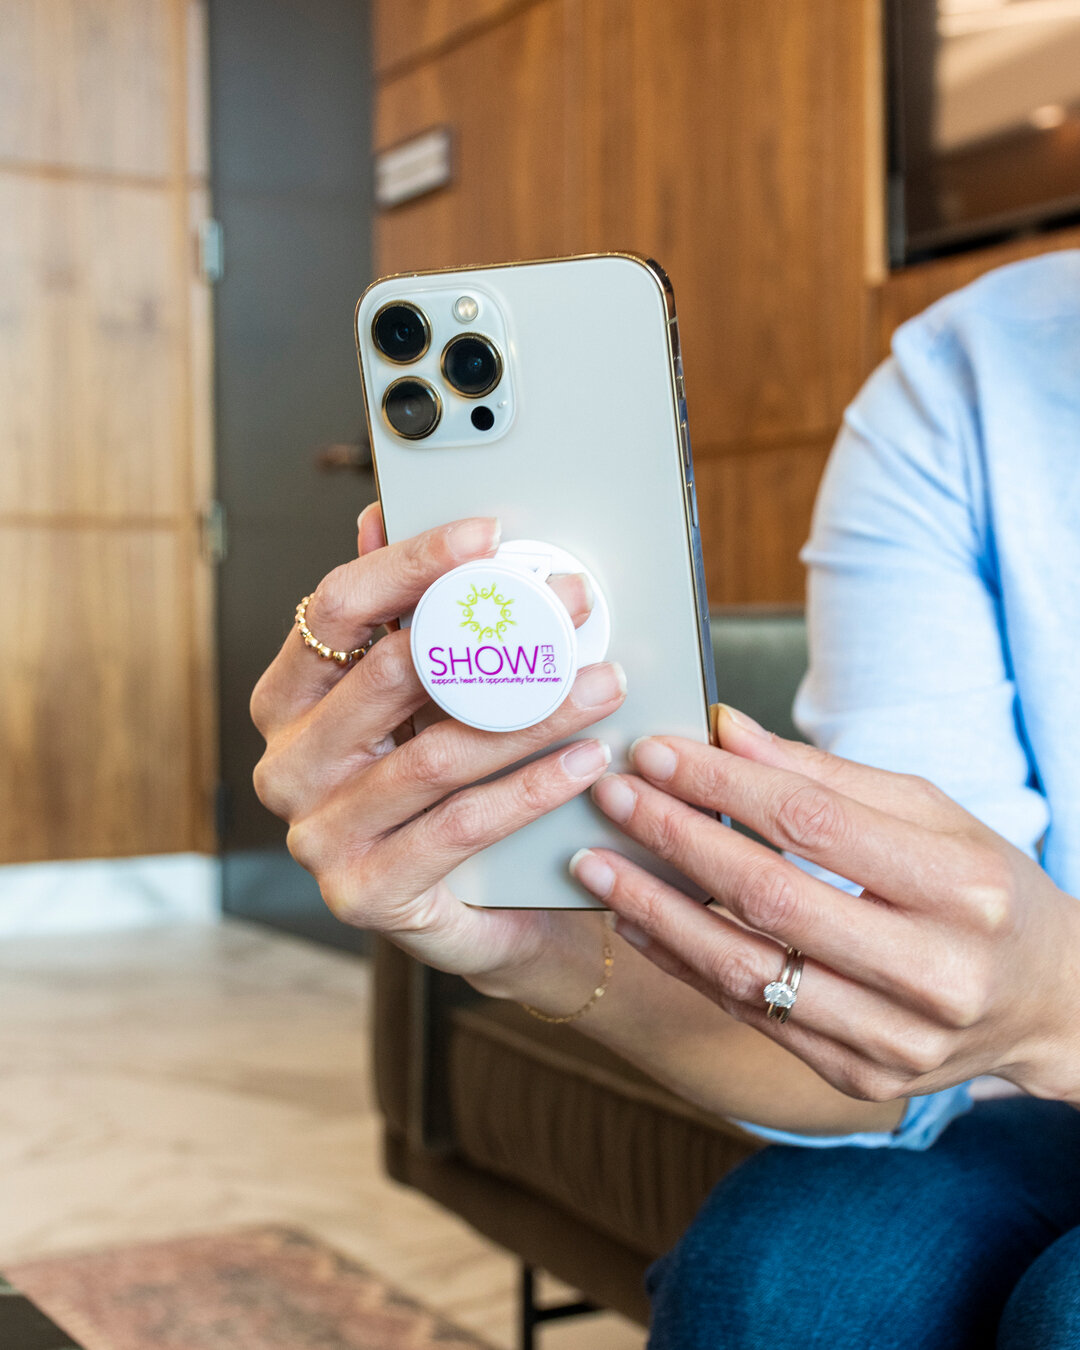 Do you need promotional items for an upcoming event? We can help you! Check out these Pop Sockets, Stickers and Webcam Covers we created and produced for @cloroxco!​​​​​​​​​
#promotionalitems #shopcartpromotions #swag #clorox #popsocket #webcamcover 